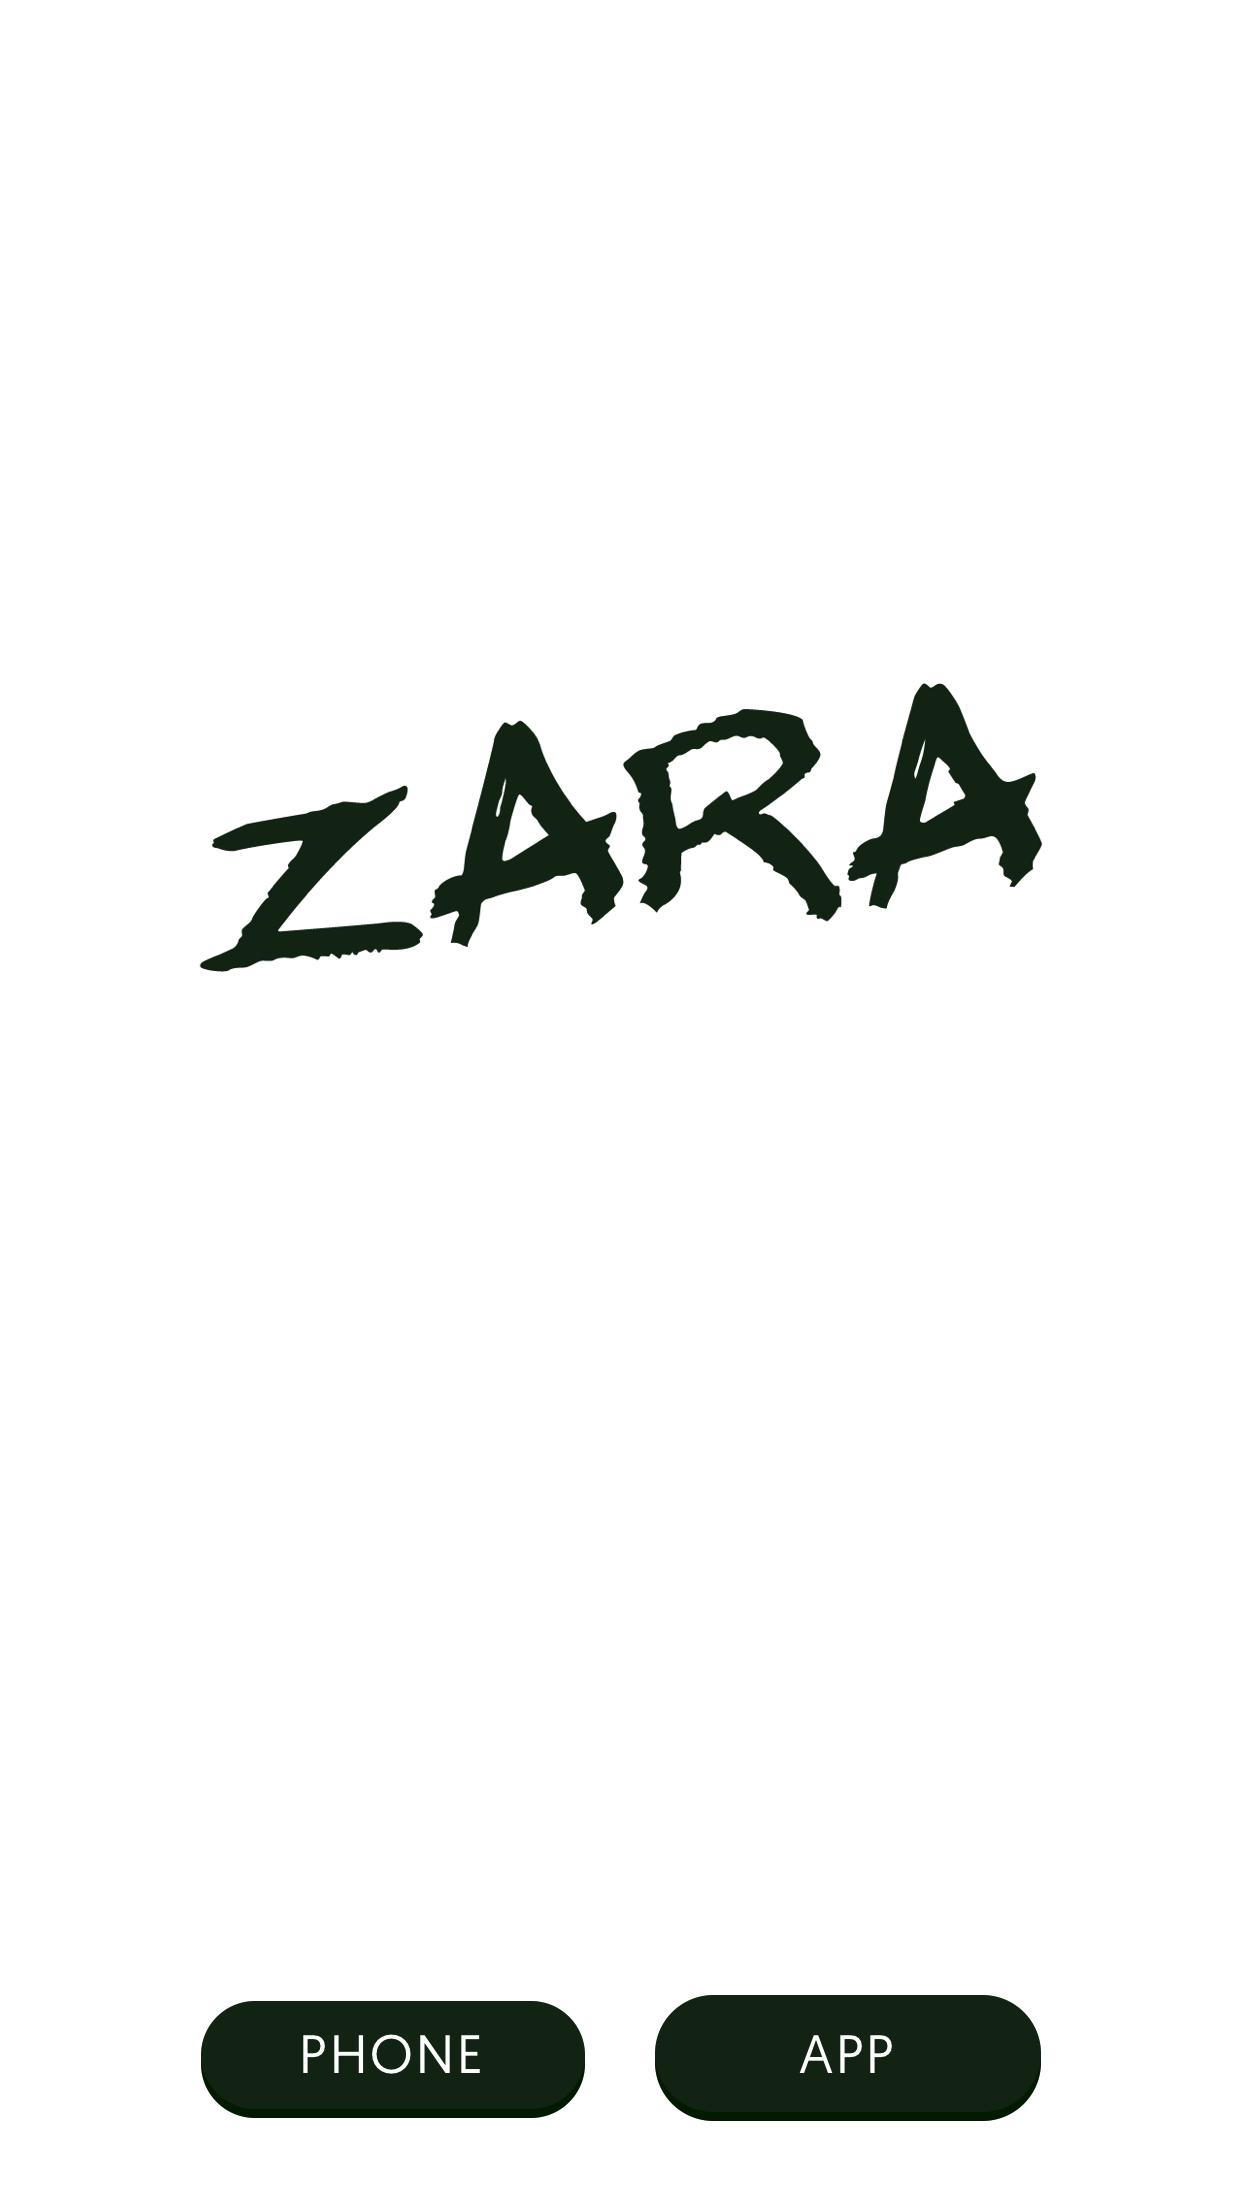 Zara for Android - APK Download